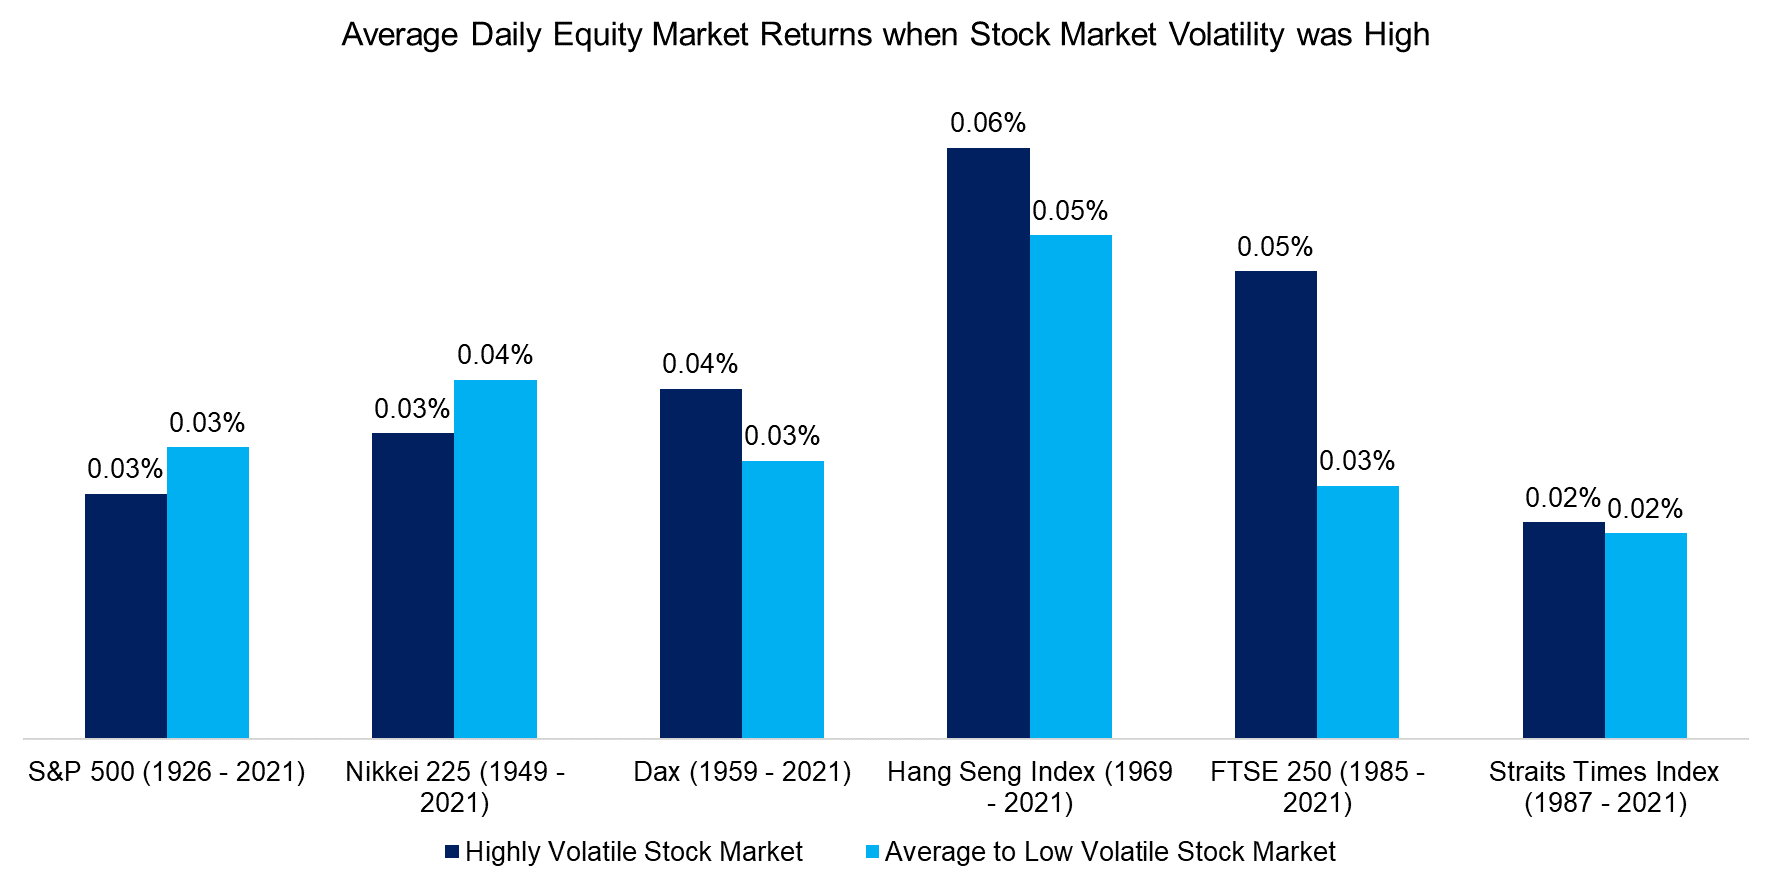 Average Daily Equity Market Returns when Stock Market Volatility was High